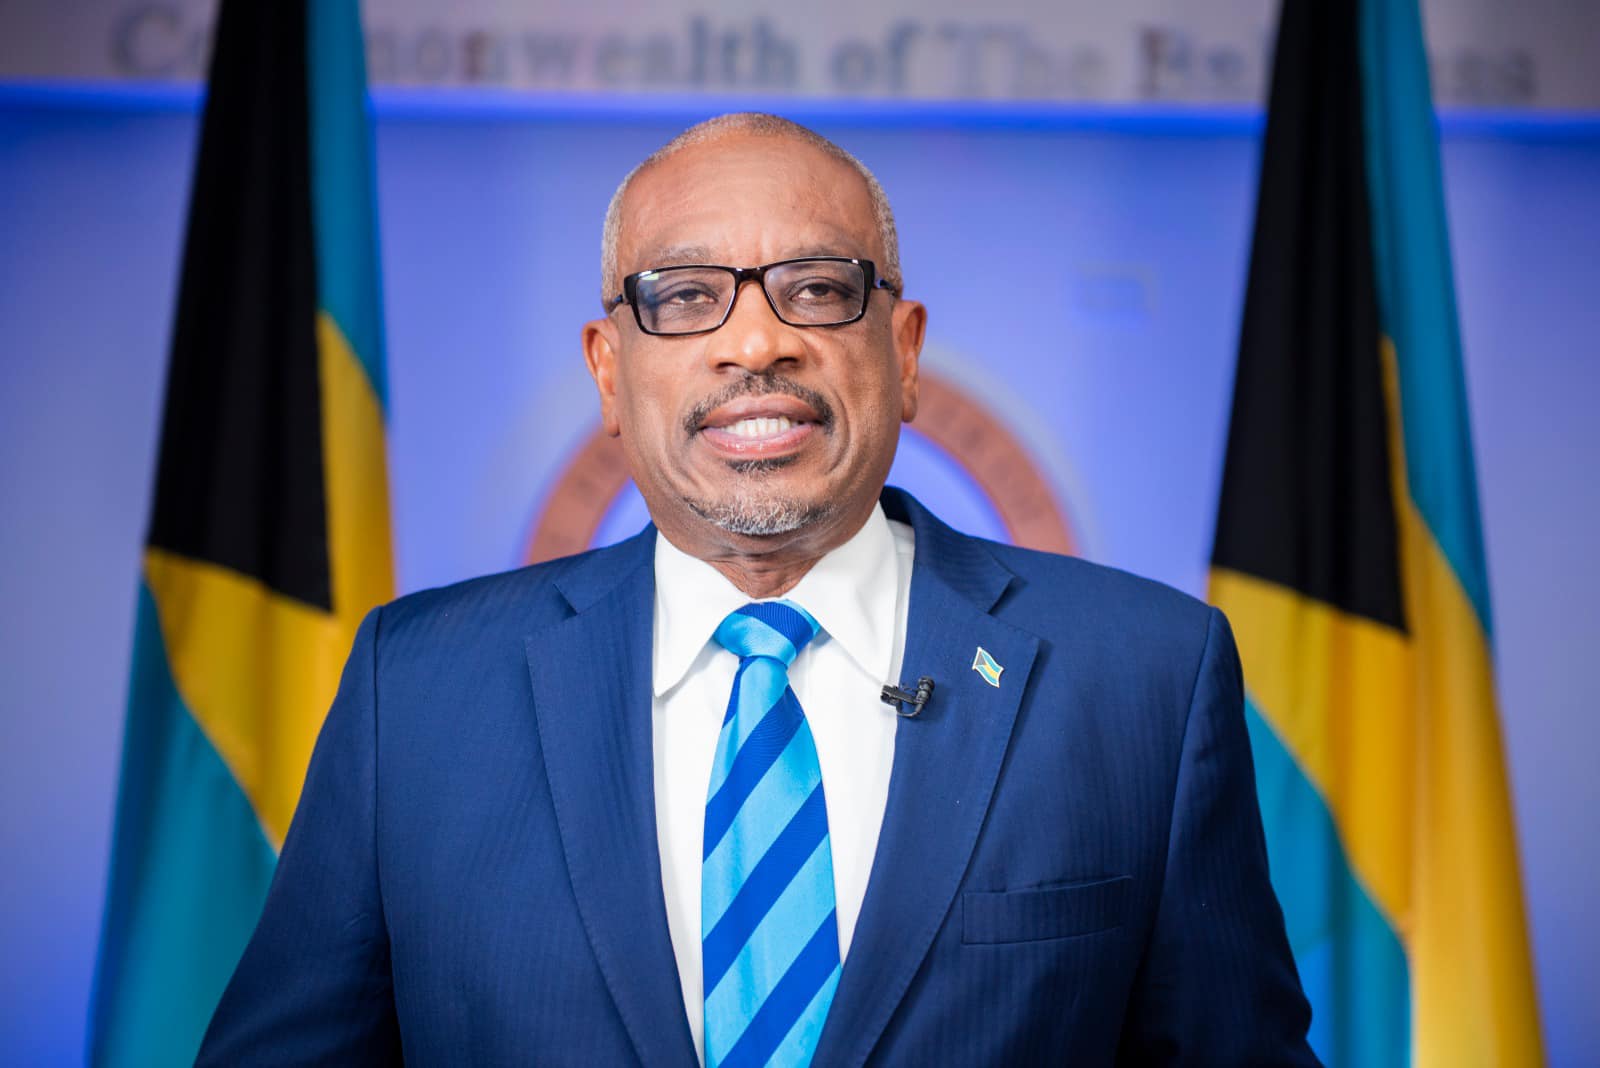 Bahamas Announces ‘Total Lockdown’ After Rise in COVID-19 Cases